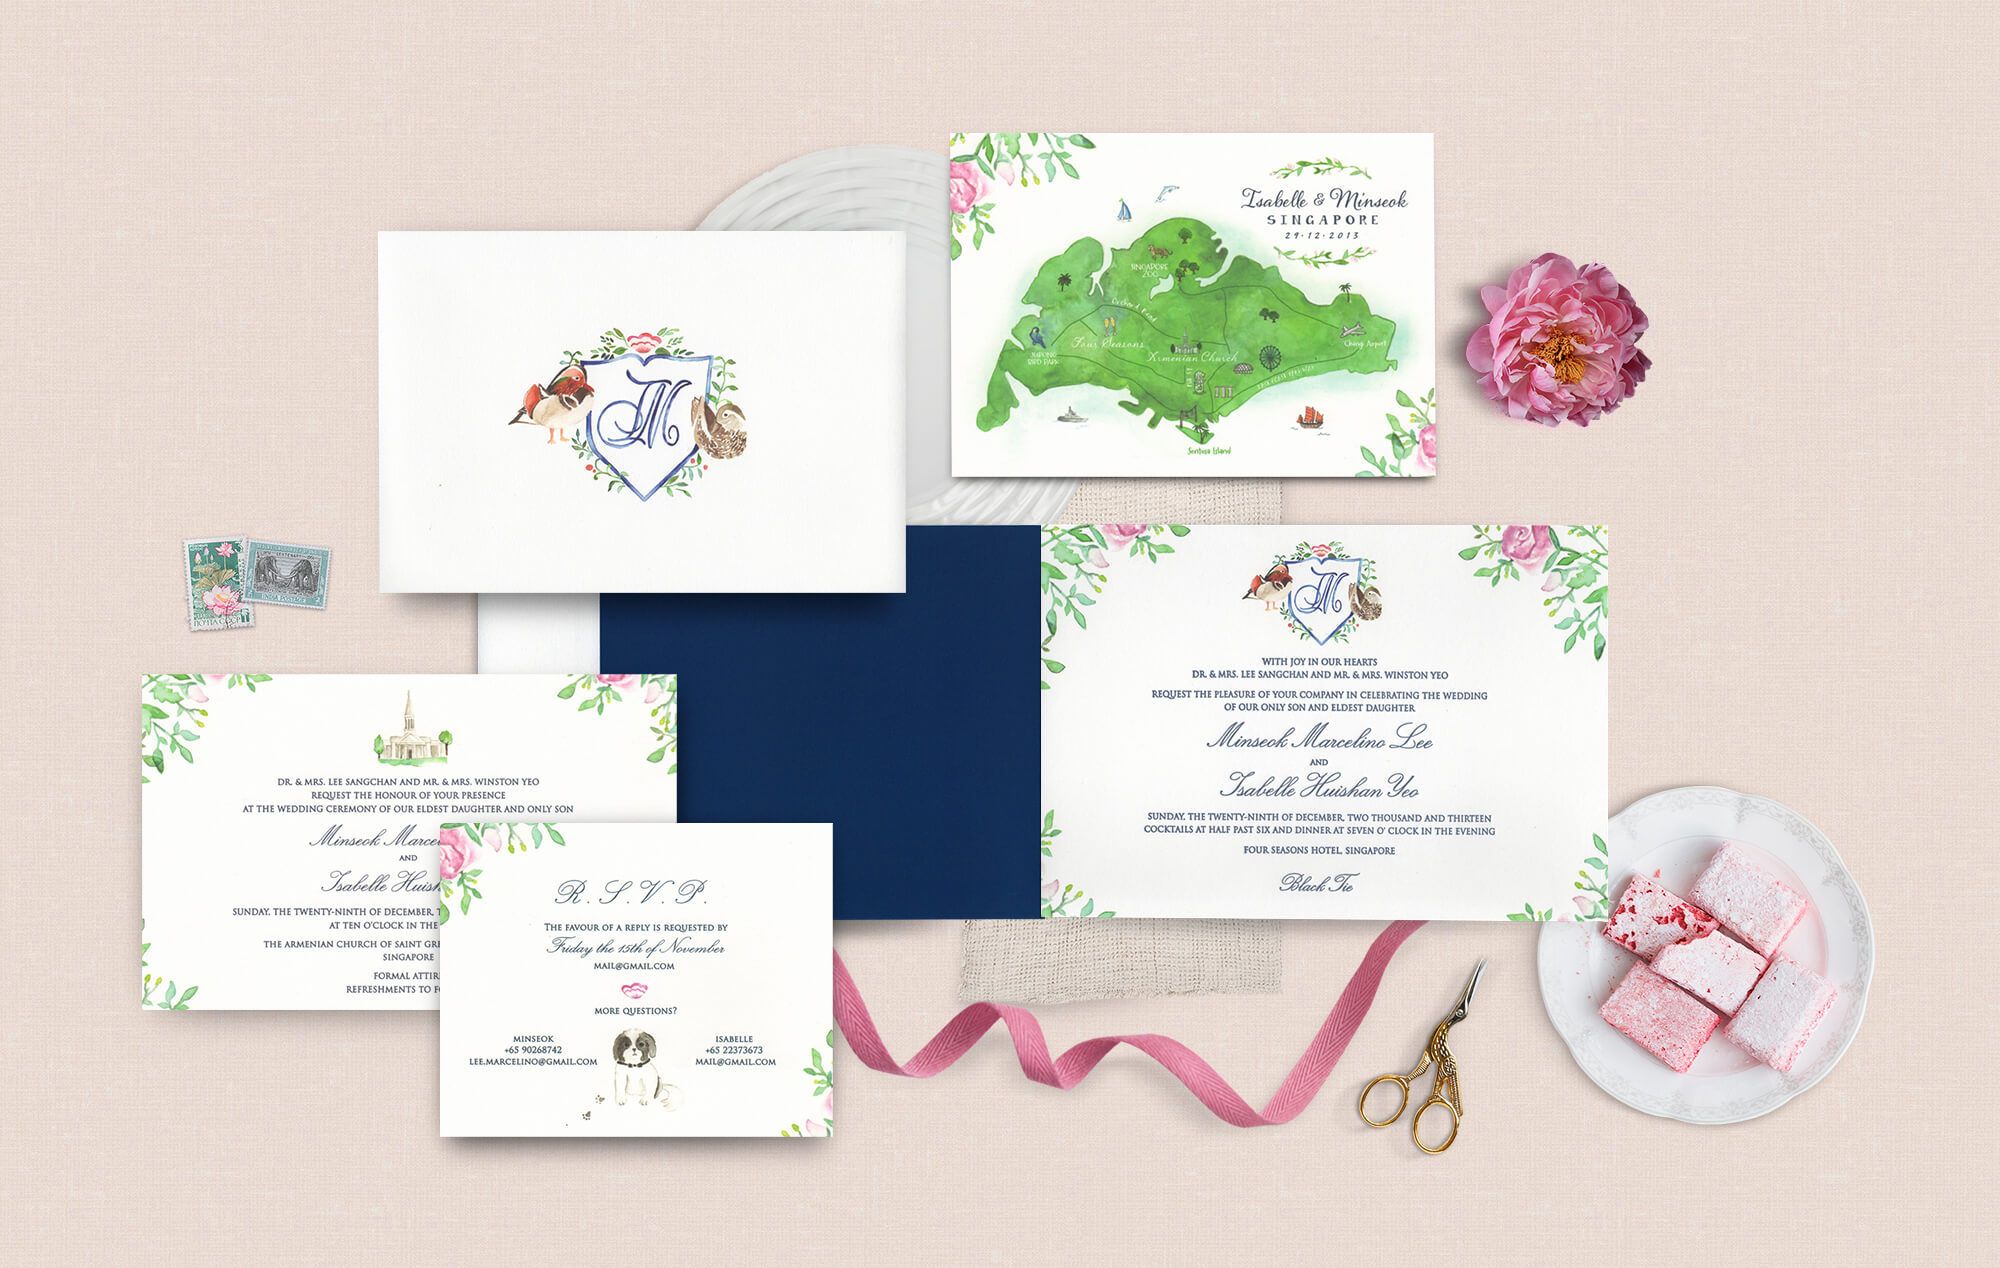 Singapore wedding invitation with watercolor illustrations